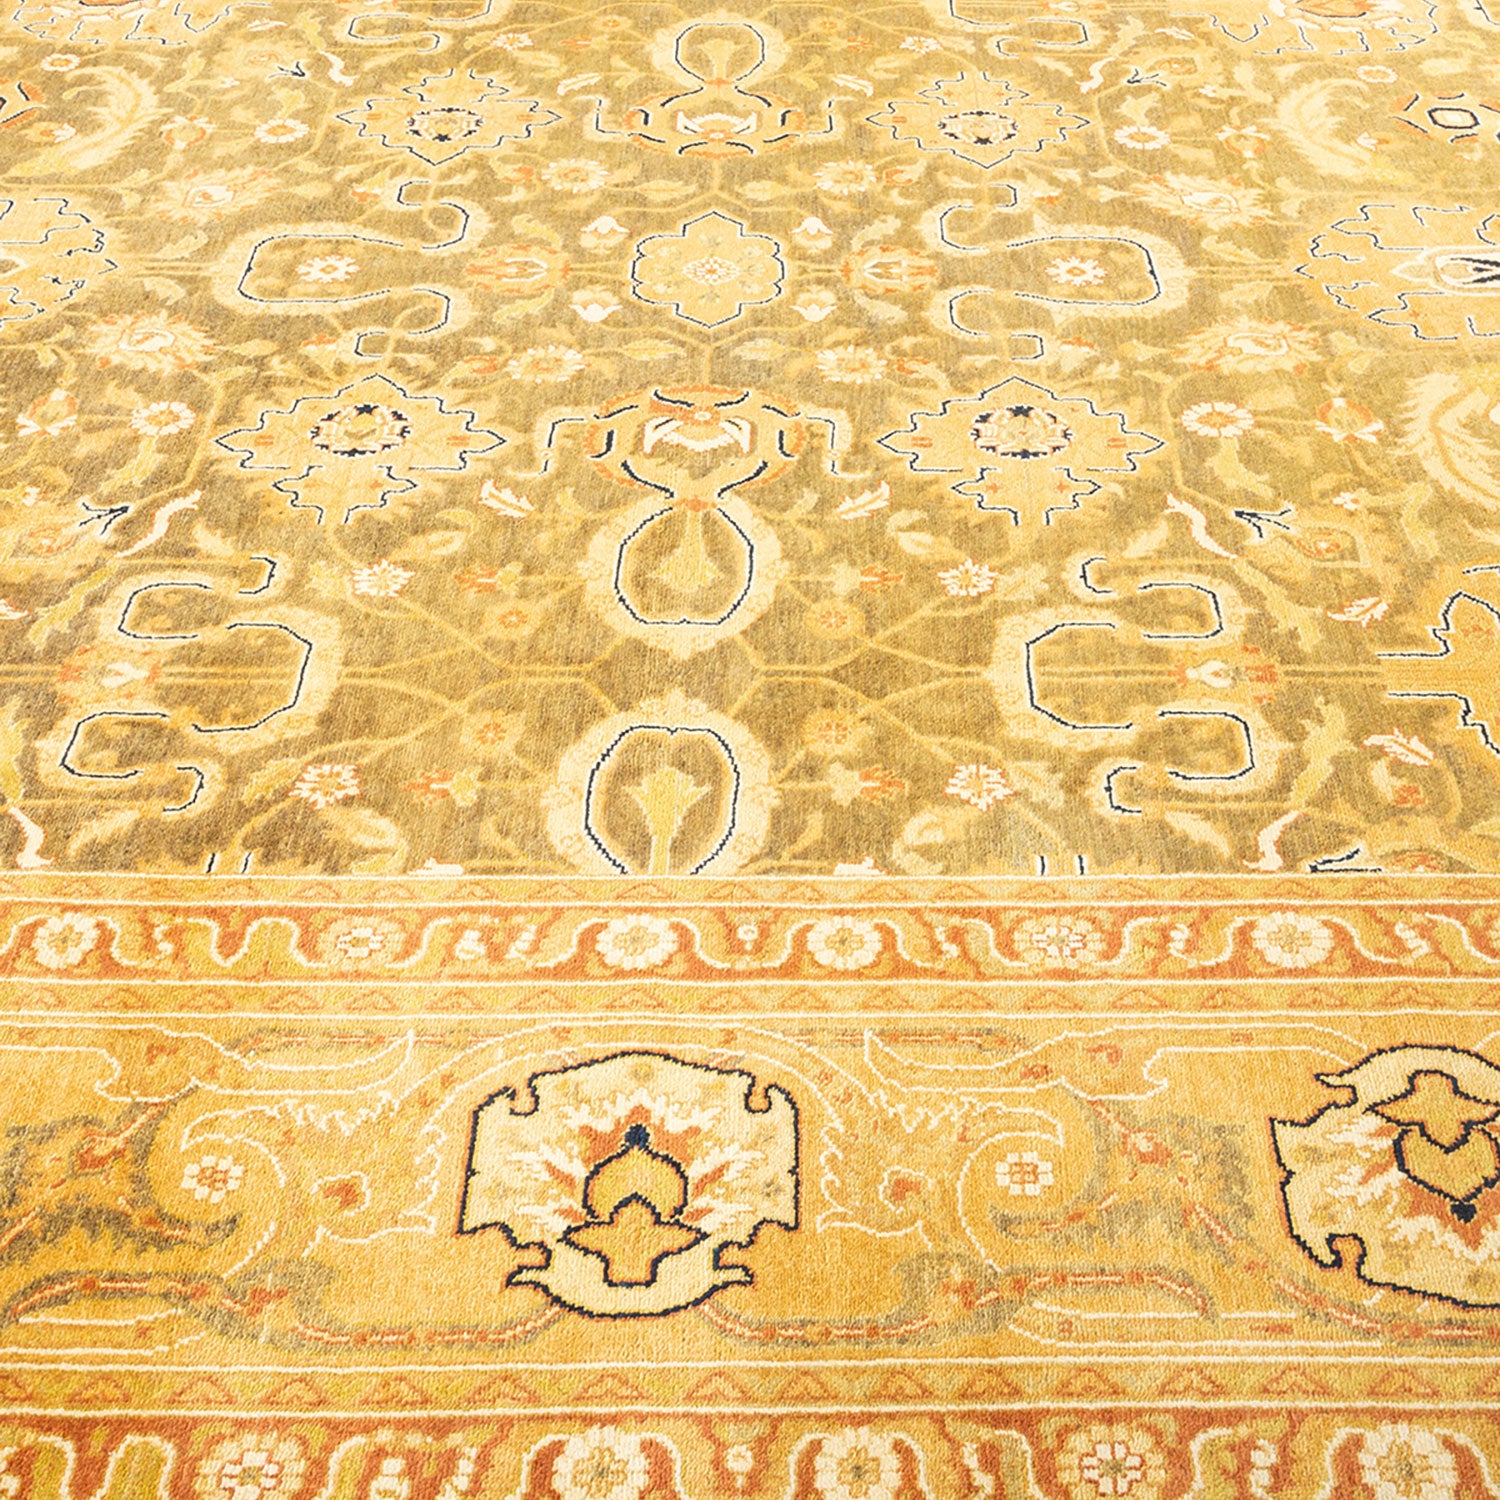 Exquisite Oriental-inspired carpet with intricate patterns and rich texture.